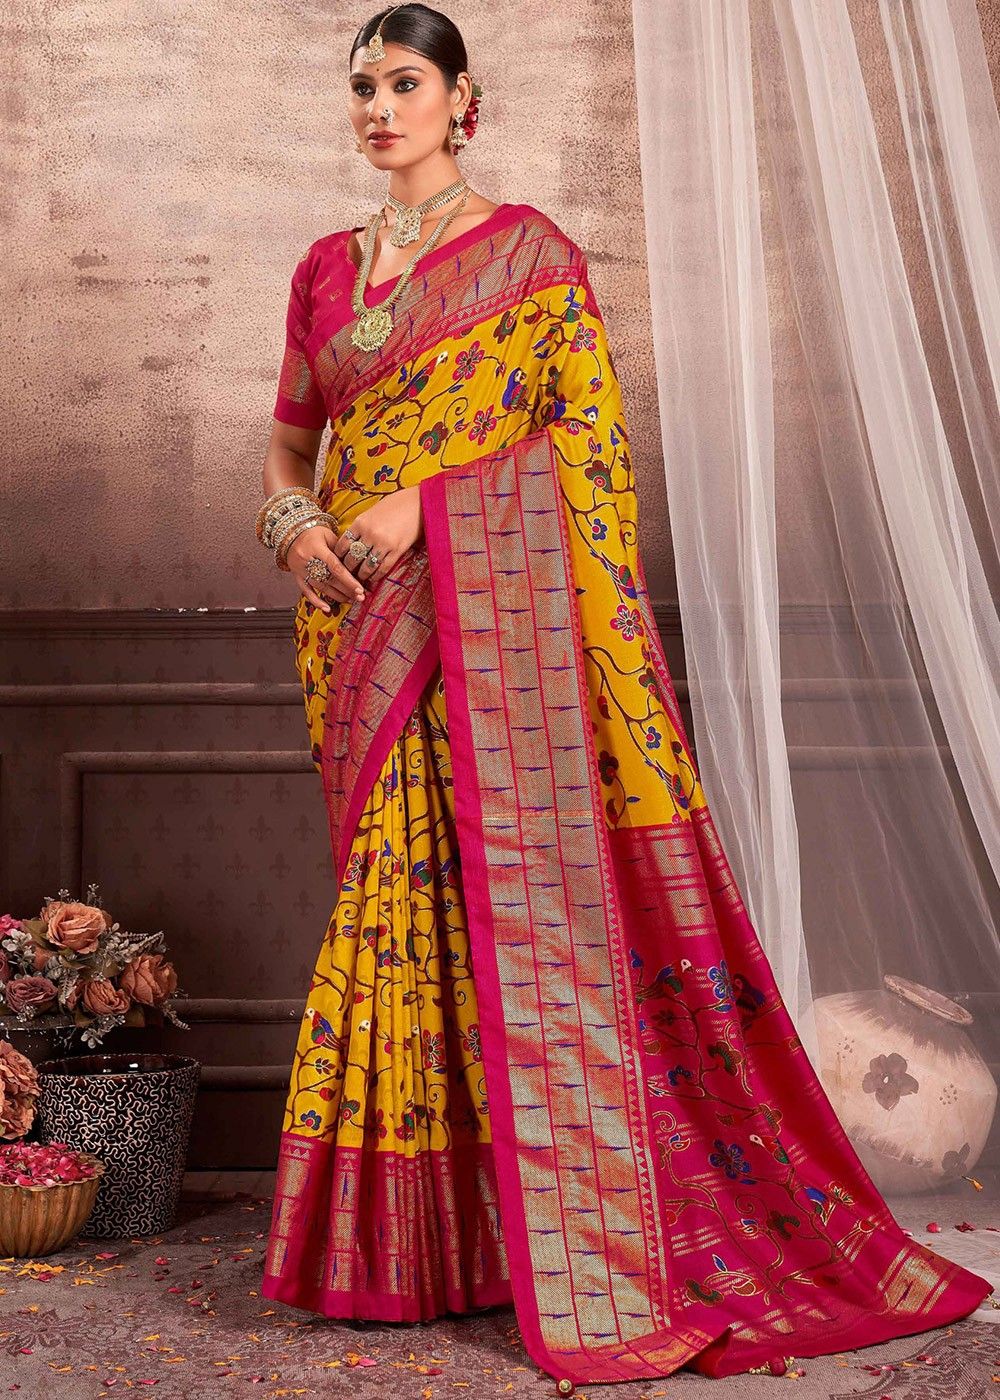 Saree Fashion: 6 Bollywood-inspired sarees you must have for this